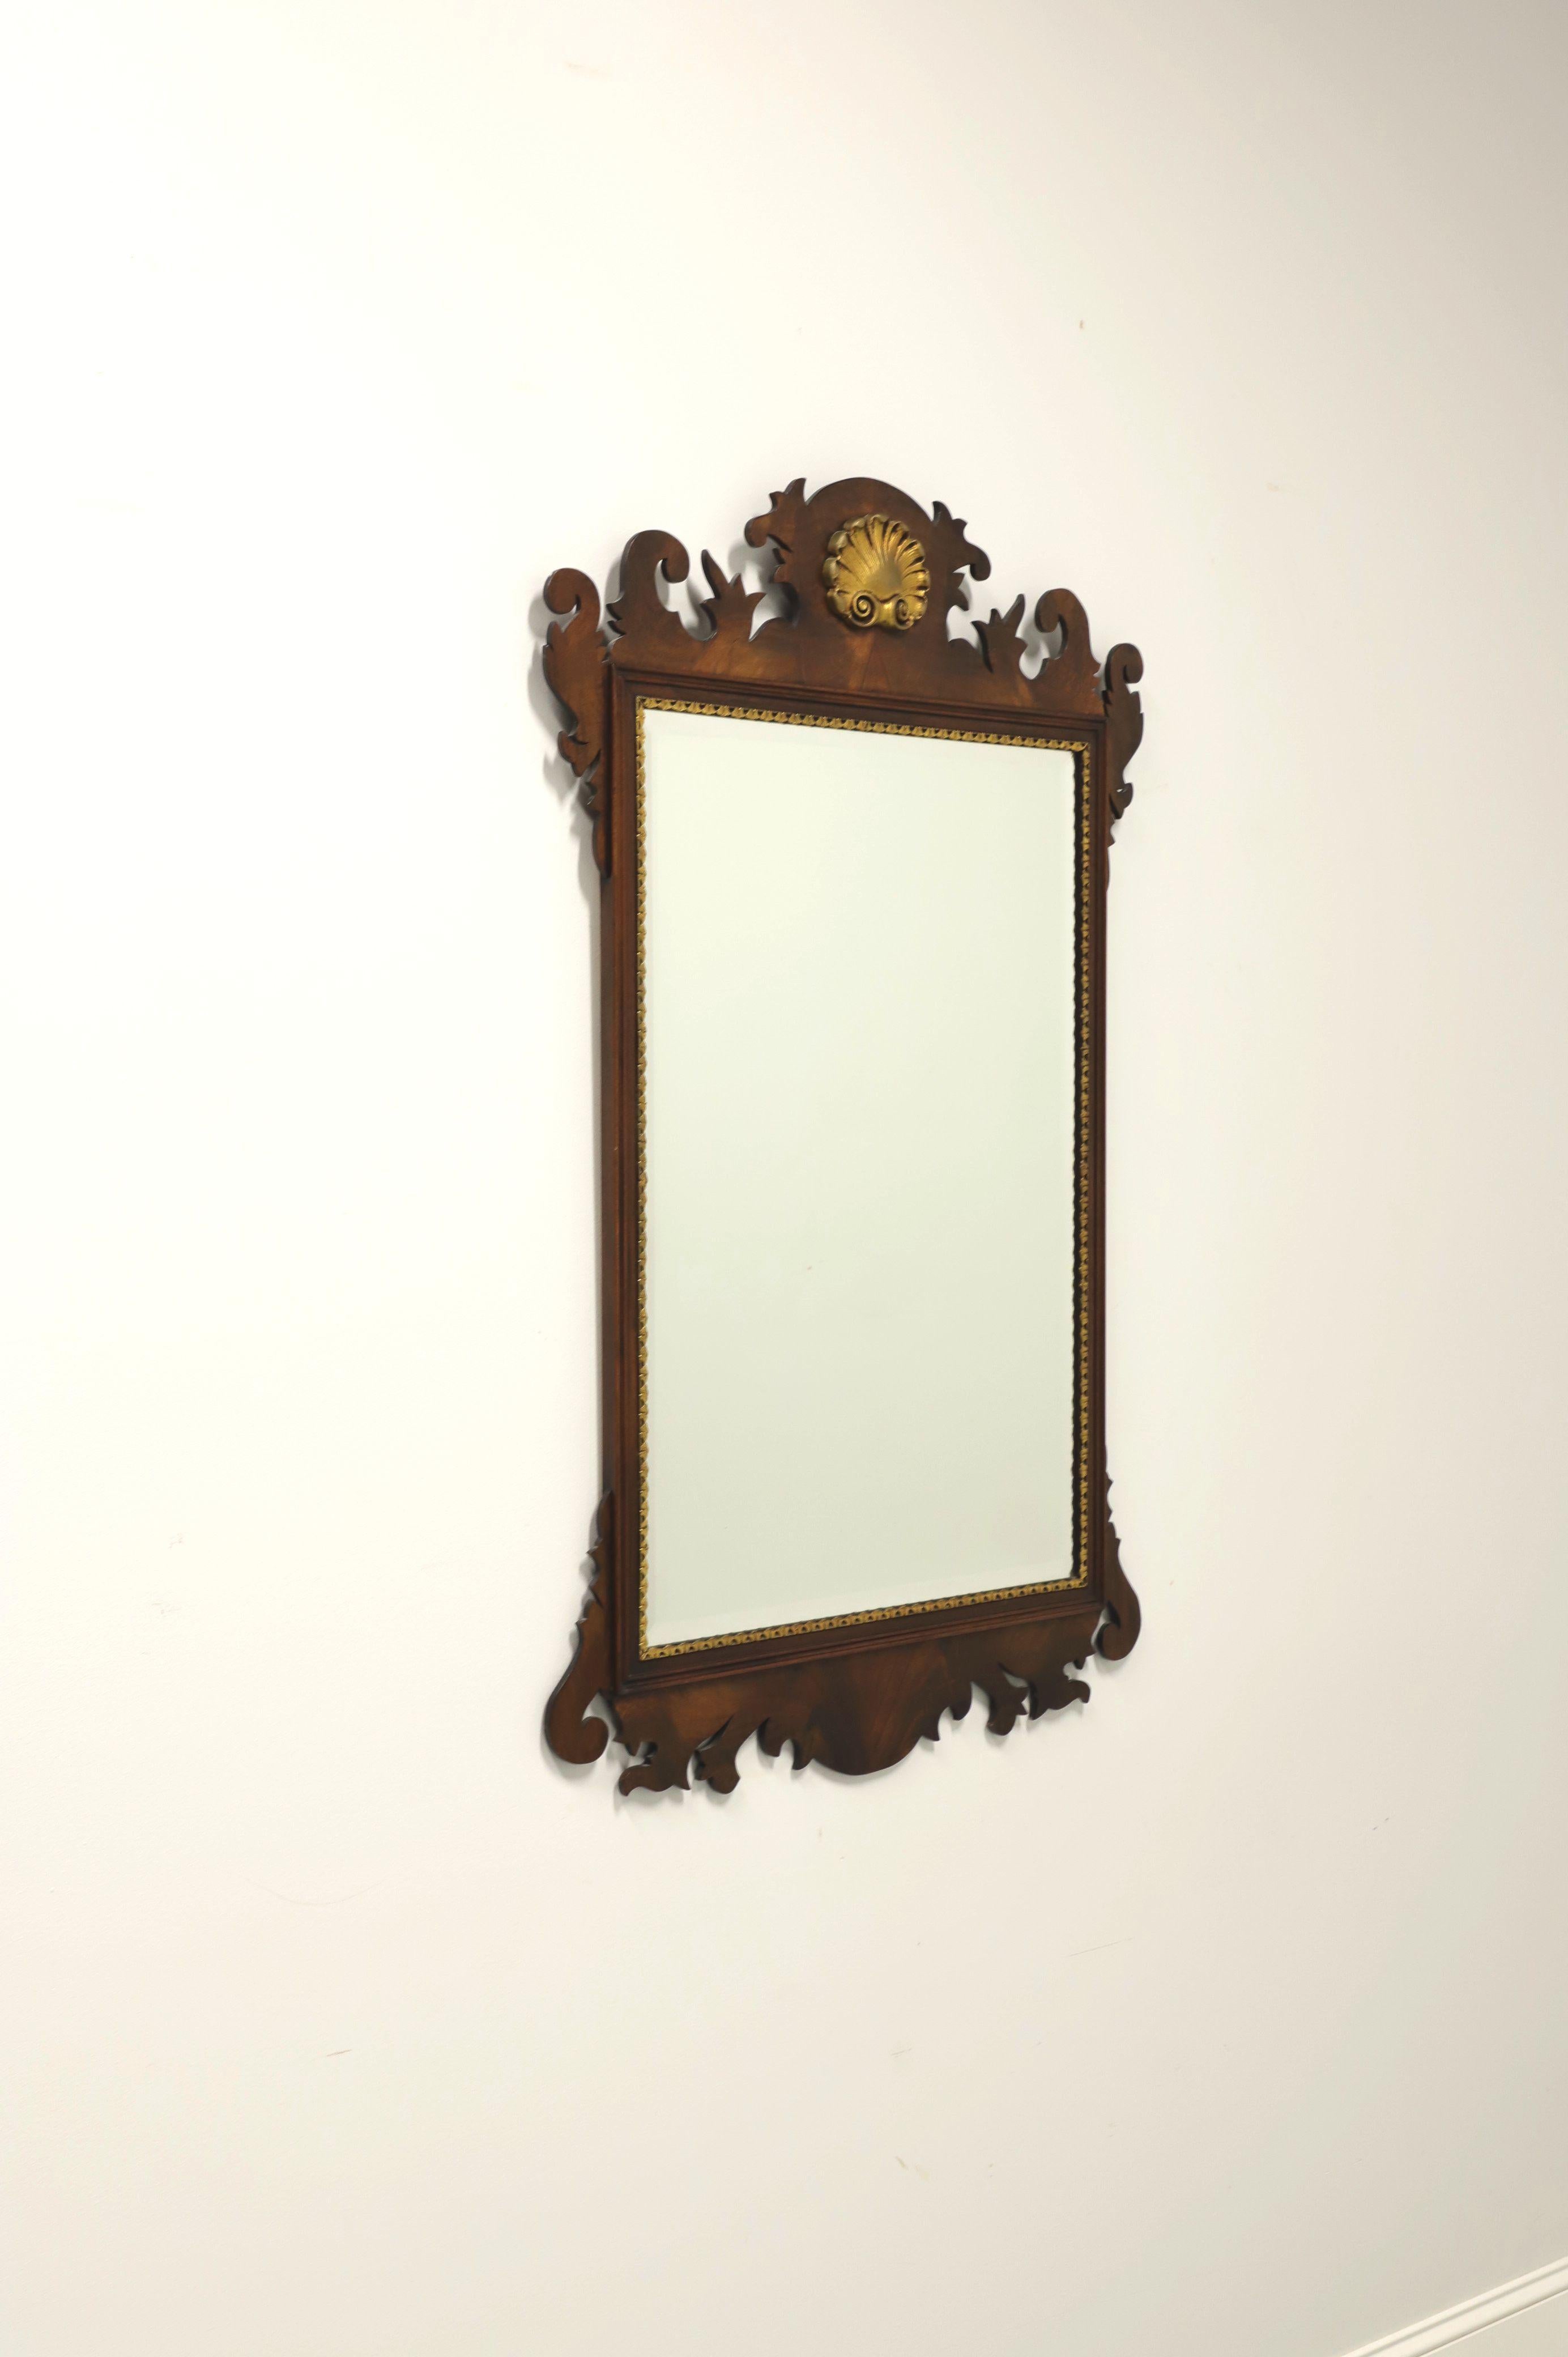 A Chippendale style wall mirror by Henkel Harris, of Winchester, Virginia, USA. Bevel edge mirrored glass, flame mahogany frame with gold trim and top center gold gilt shell shaped medallion. Made in the late 20th Century

Style #: H-6, Finish: 29